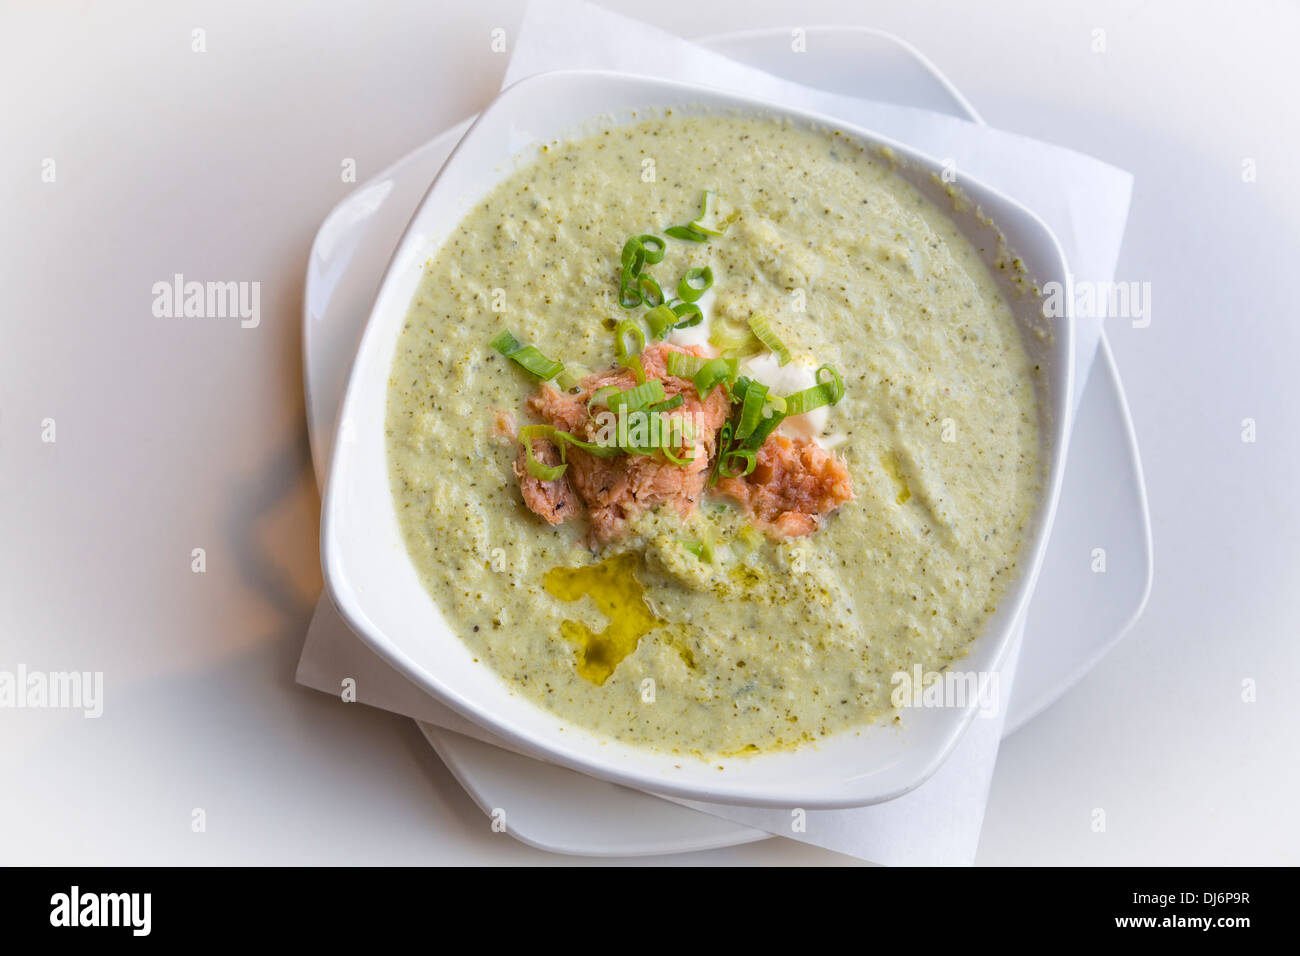 South Africa, Franschhoek. Broccoli-mushroom Soup with Salmon and Cream. Stock Photo